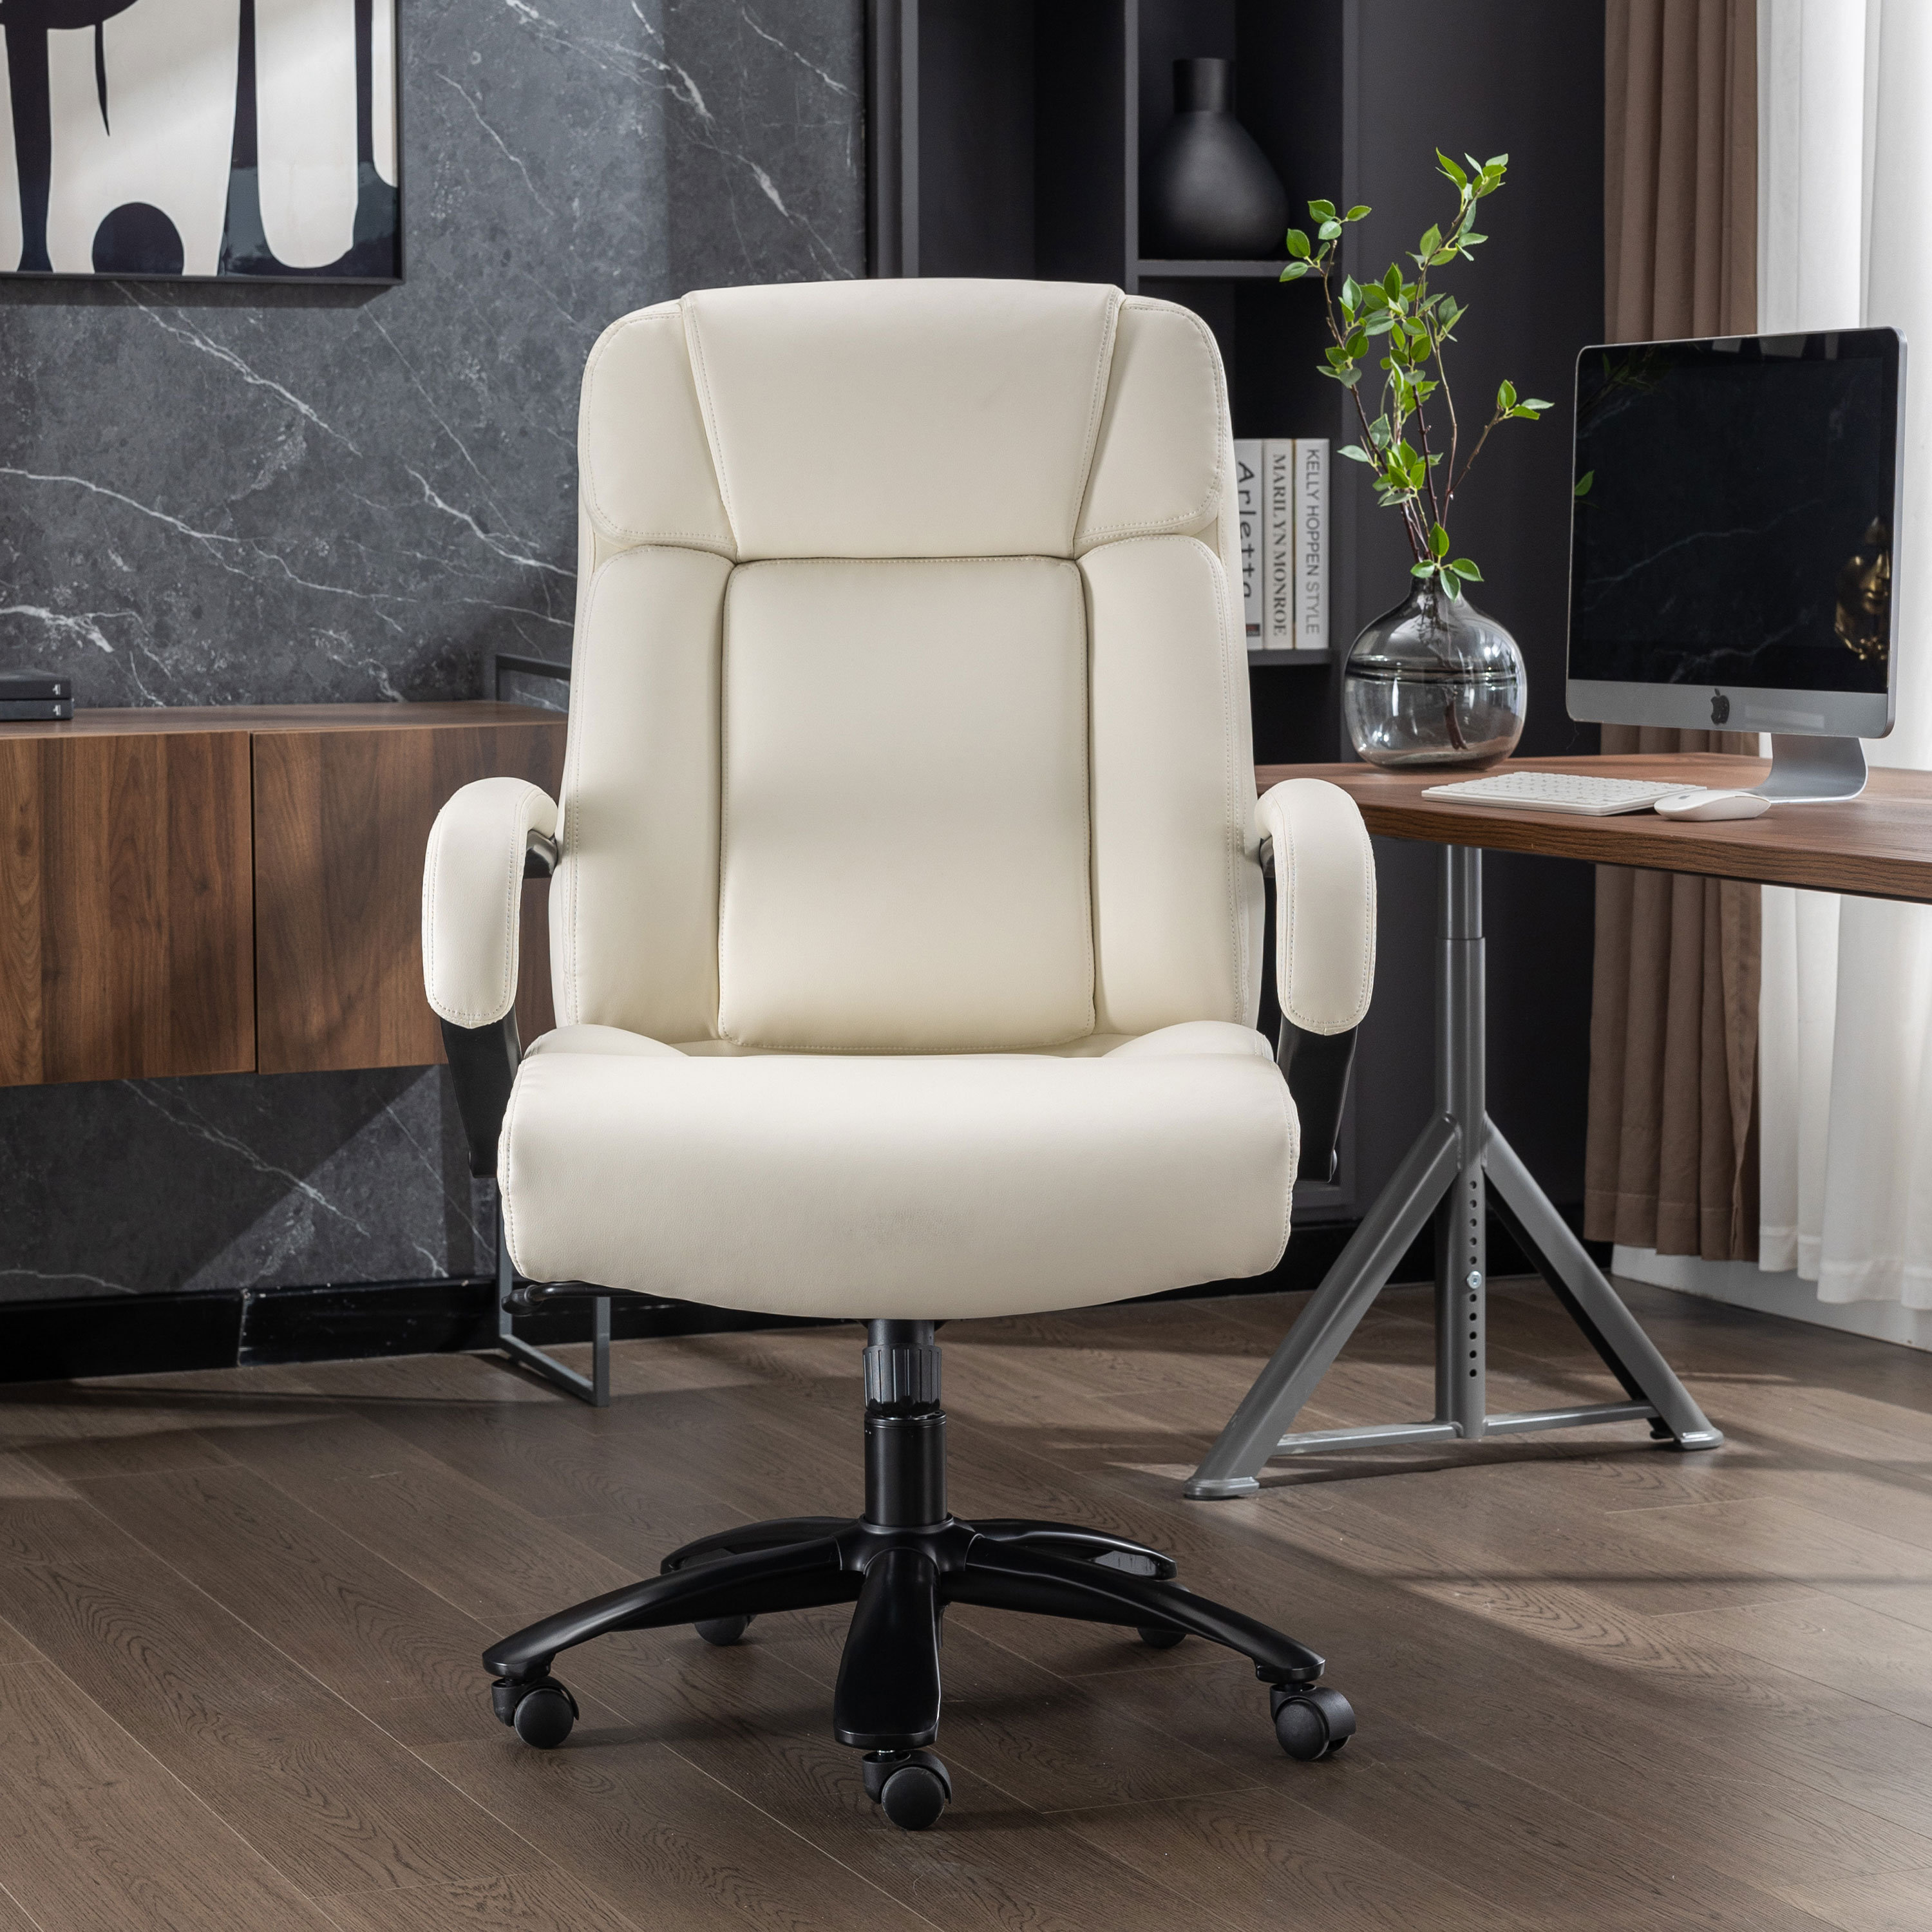 High style furniture, Bullet proof desk office chair.